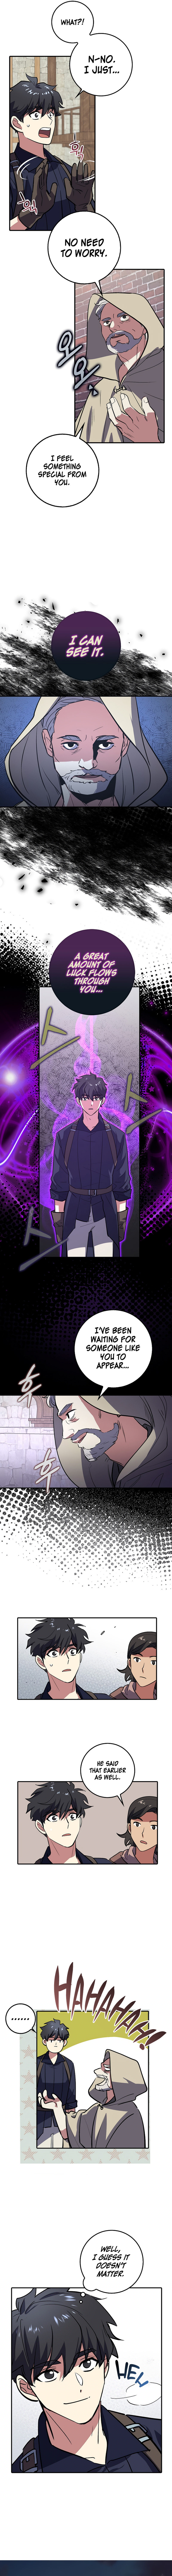 Hyper Luck Chapter 1 - Page 12